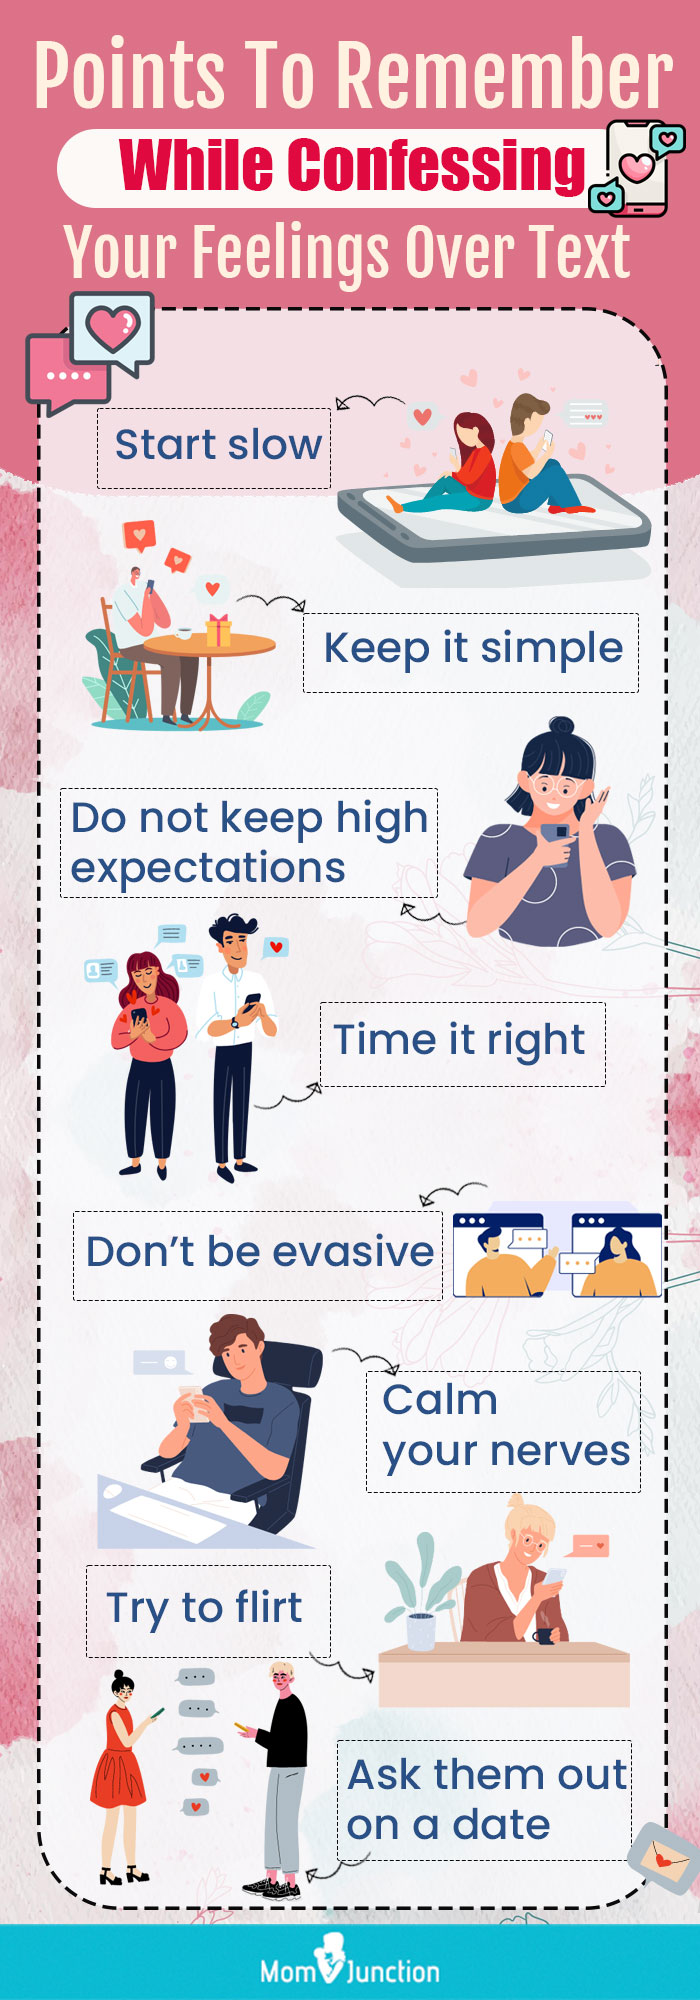 tips to tell someone you like them over text (infographic)